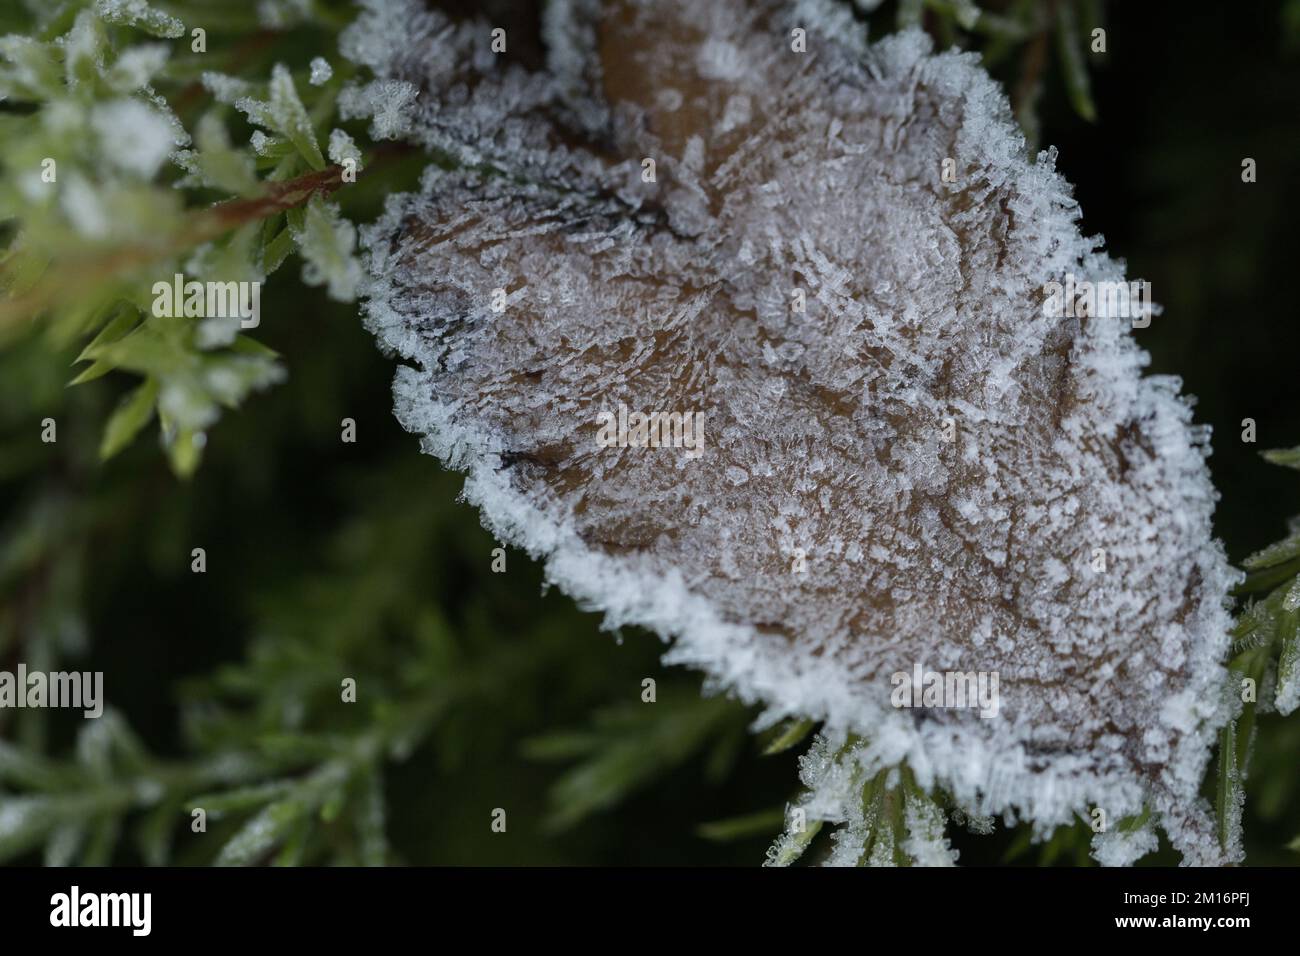 Close-up of heavy frost covering plant leaves Stock Photo